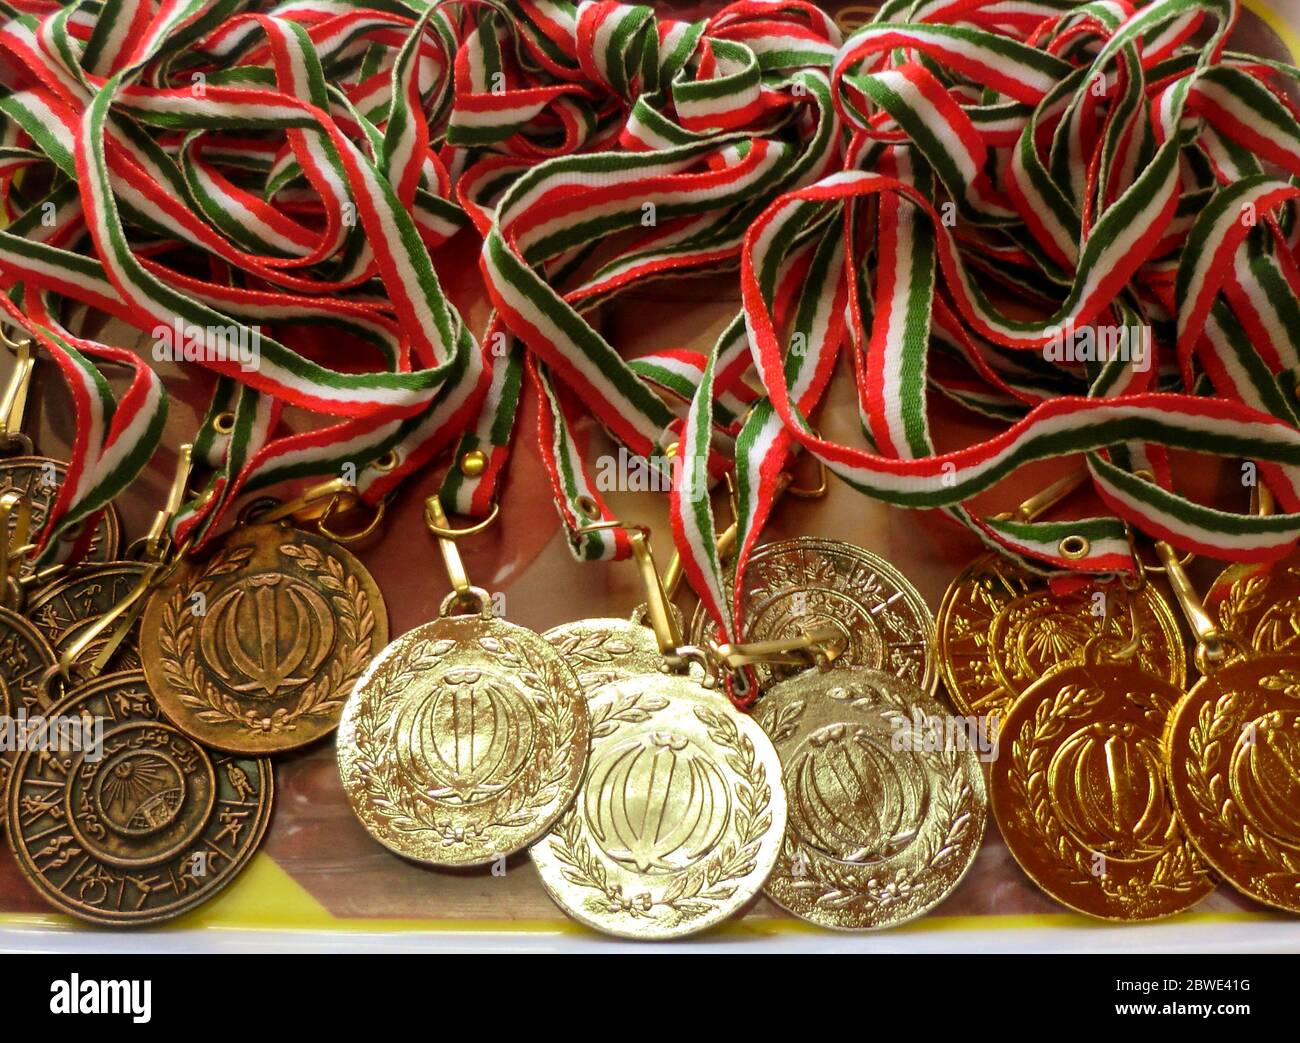 Golden, silver, bronze sports medal with red, white and green ribbon. Winner awards. Translation of the text on medals are ' islamic republic of iran. Stock Photo